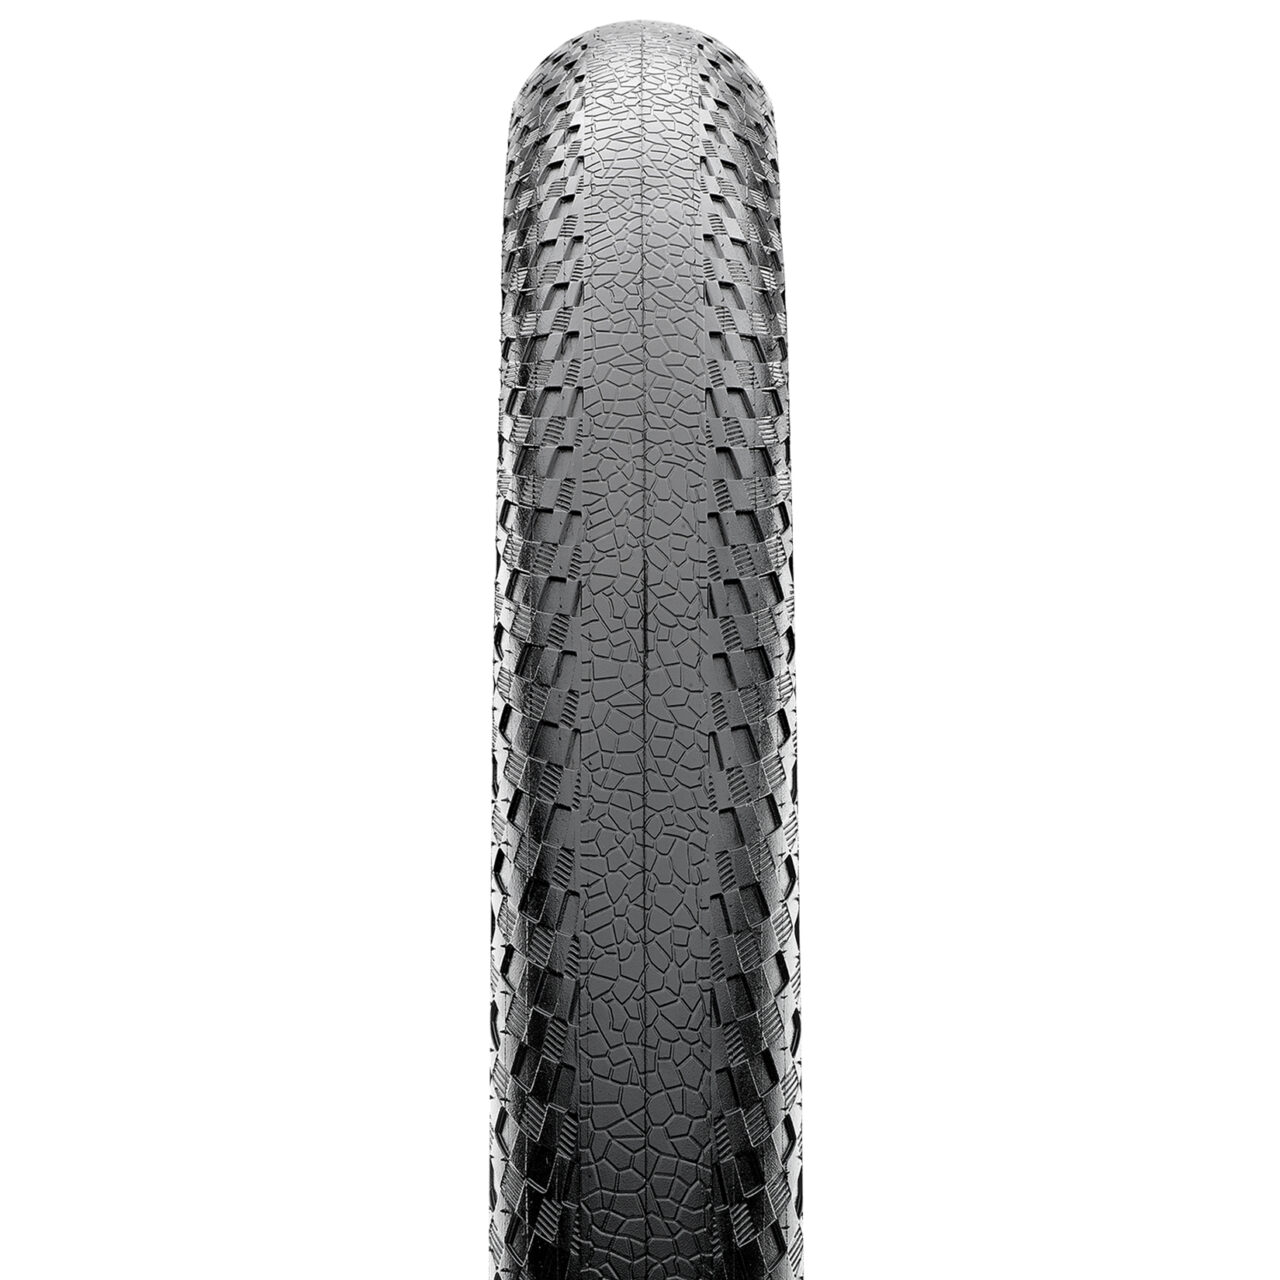 Maxxis Relix bicycle tire tread